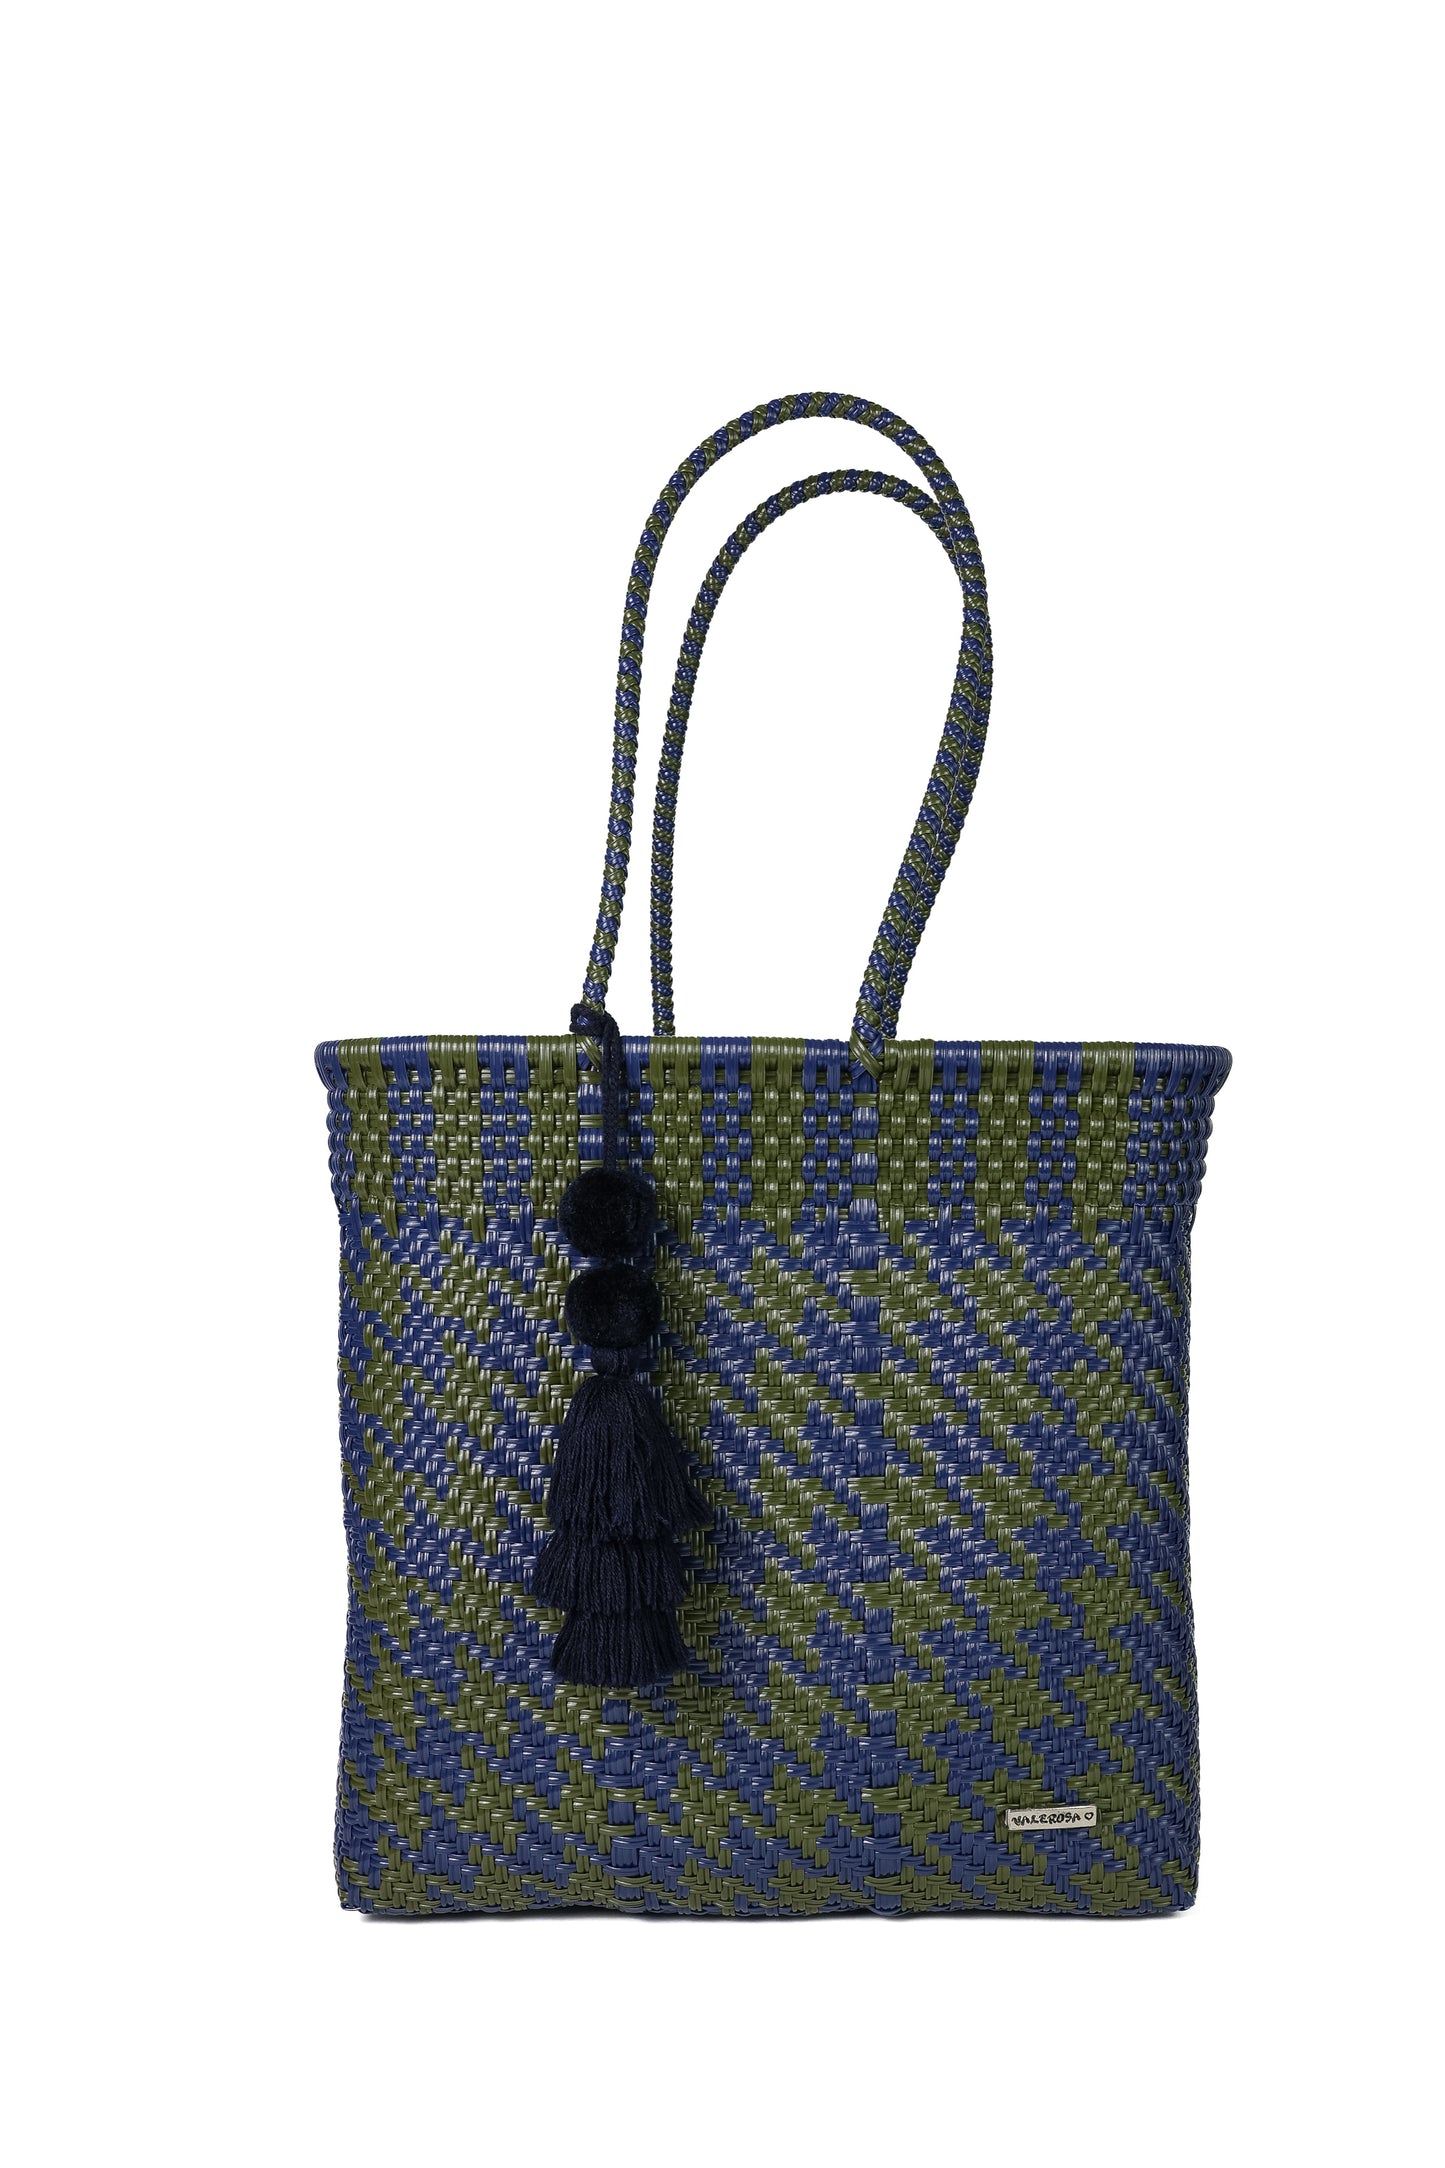 Olive and Navy Houndstooth Playera Tote